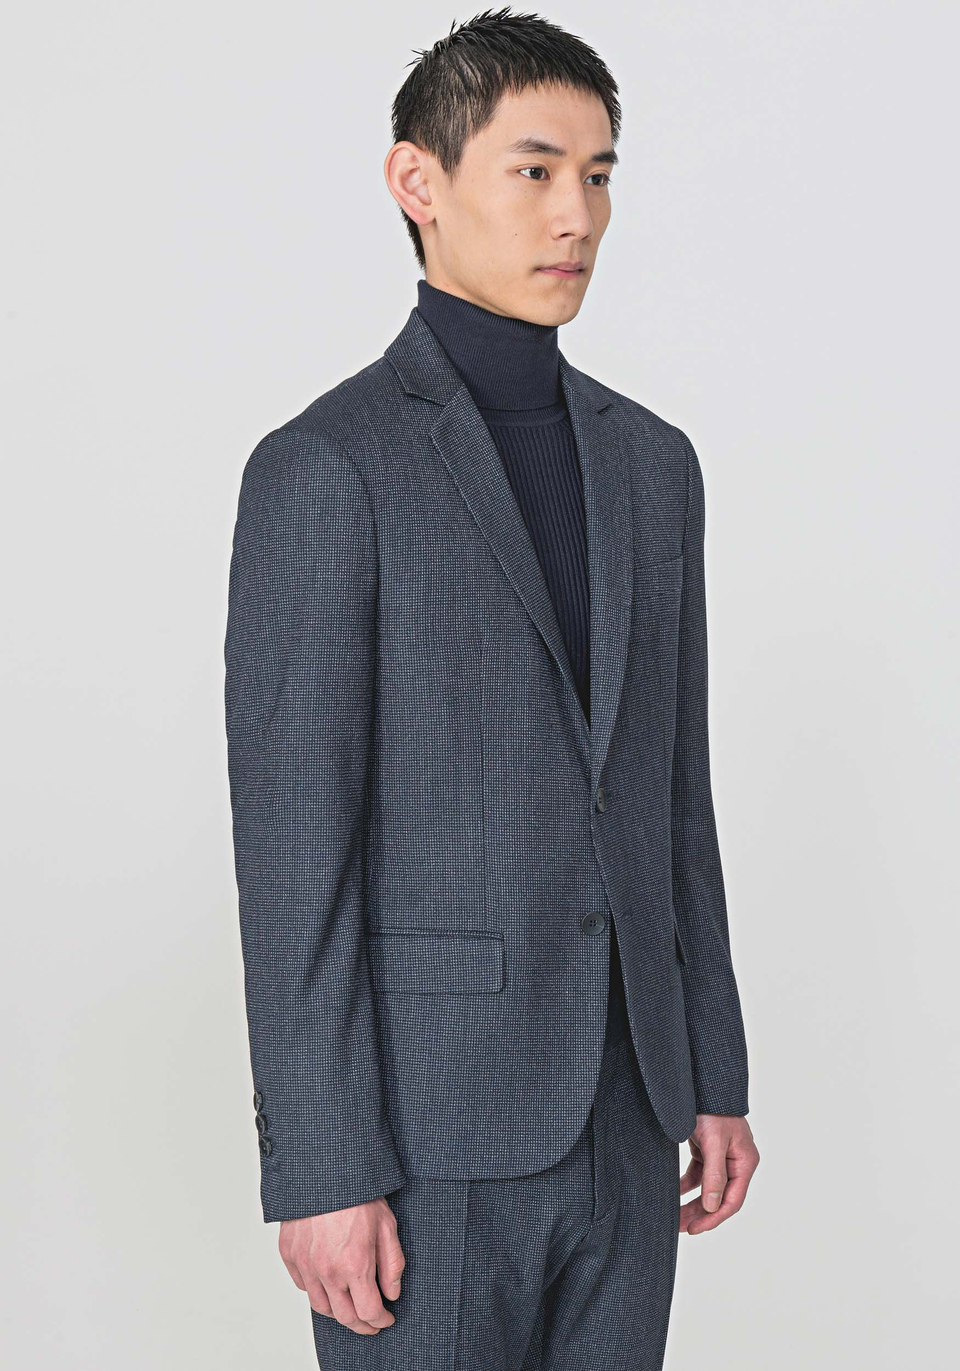 SLIM-FIT “BONNIE” JACKET MADE FROM A MICRO-PATTERNED STRETCHY FABRIC - Antony Morato Online Shop